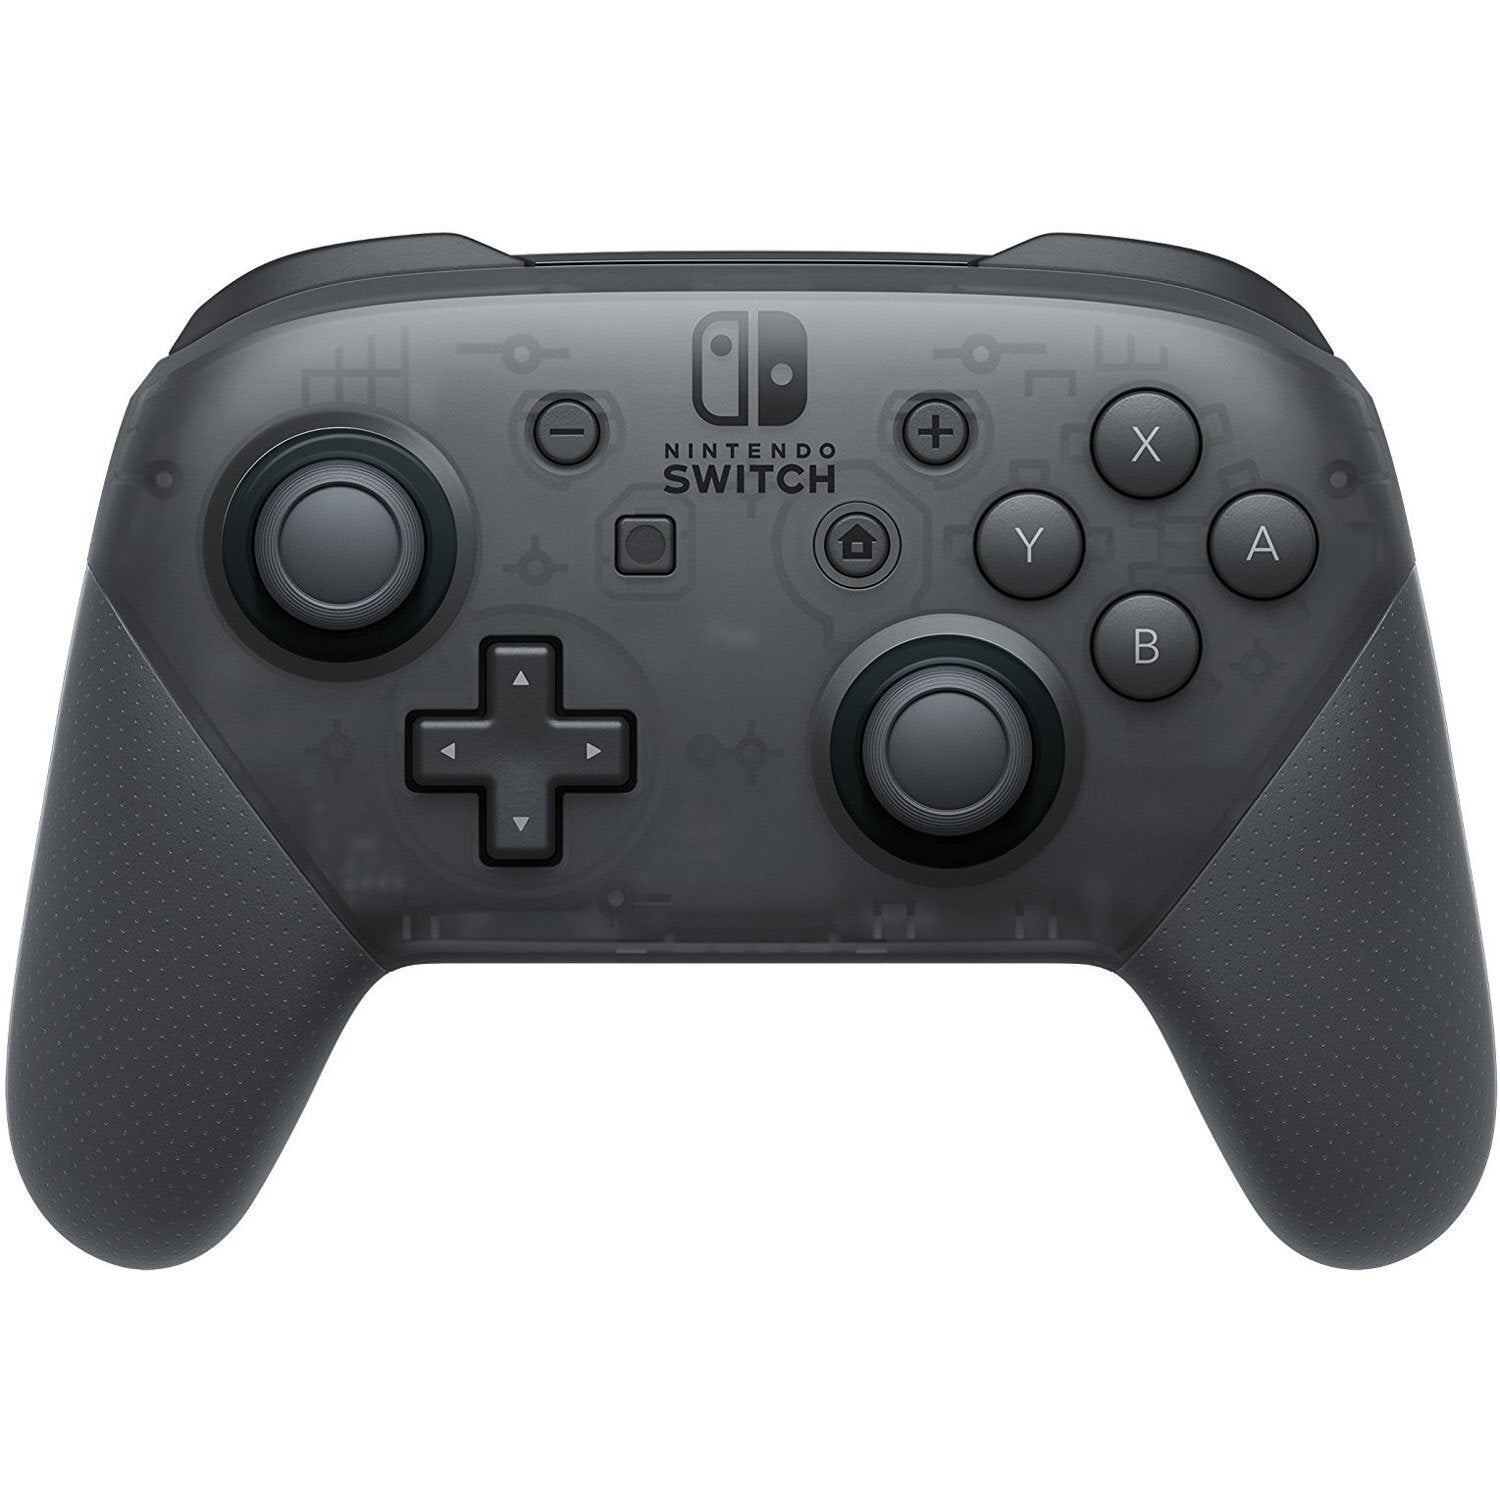 Nintendo Switch Pro Controller. - Best game controllers for iPhone and Android